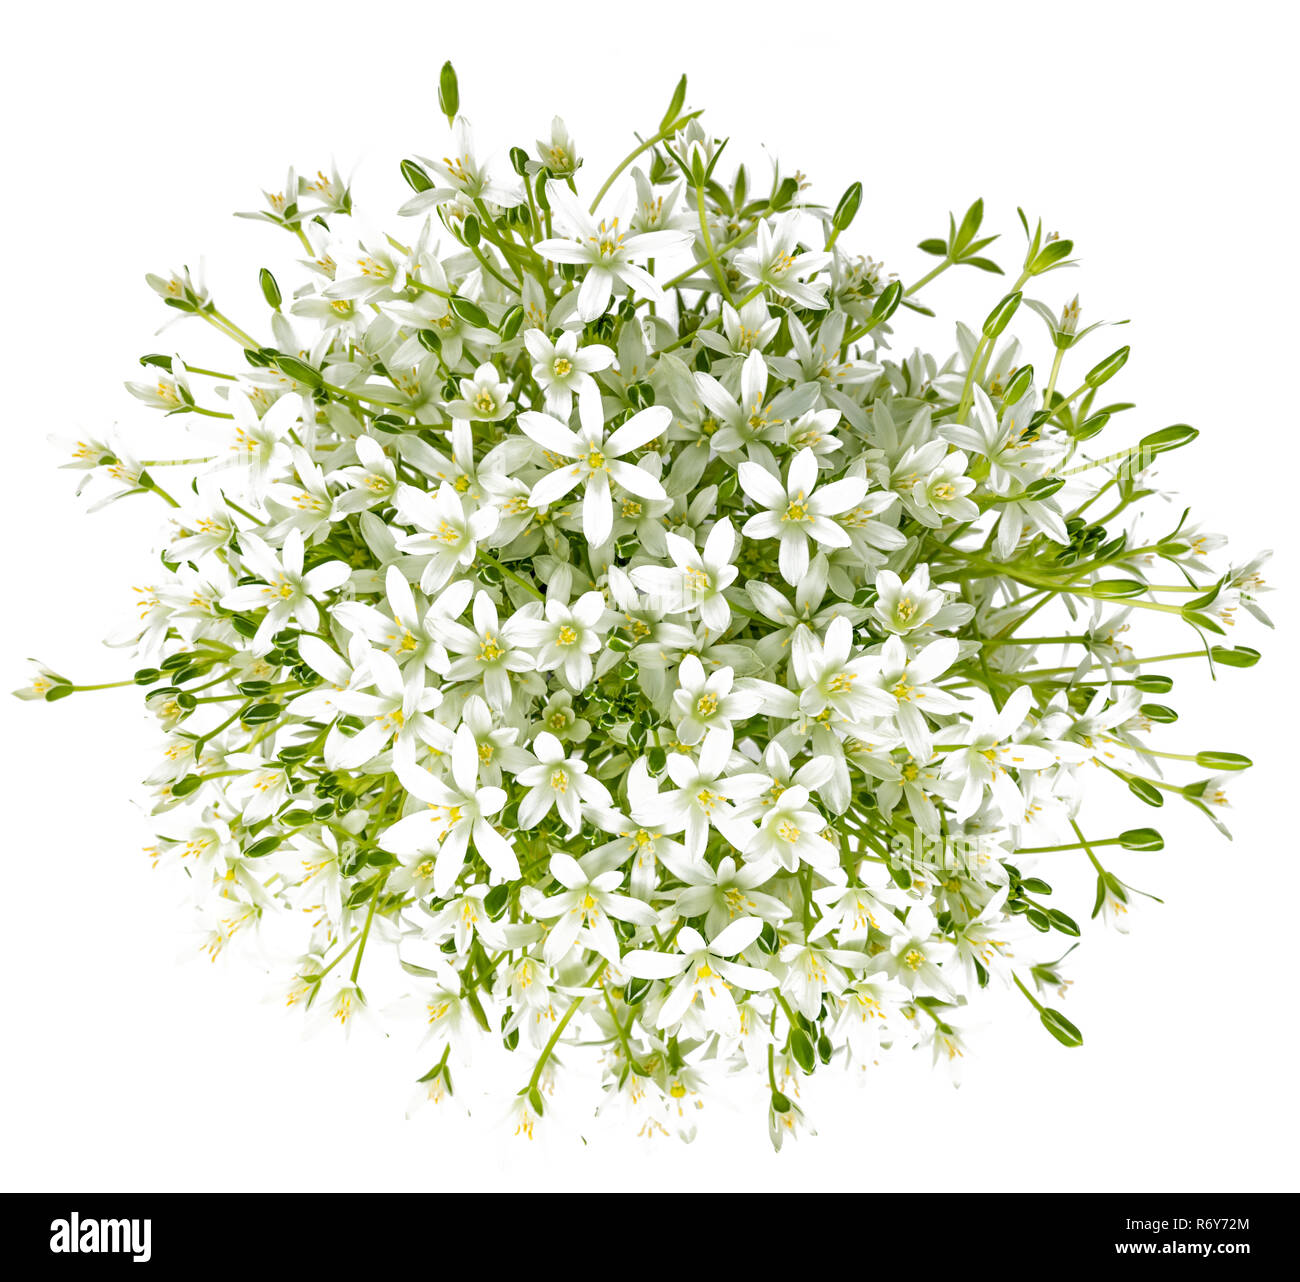 bouquet of umbels-daisy flowers on white background Stock Photo